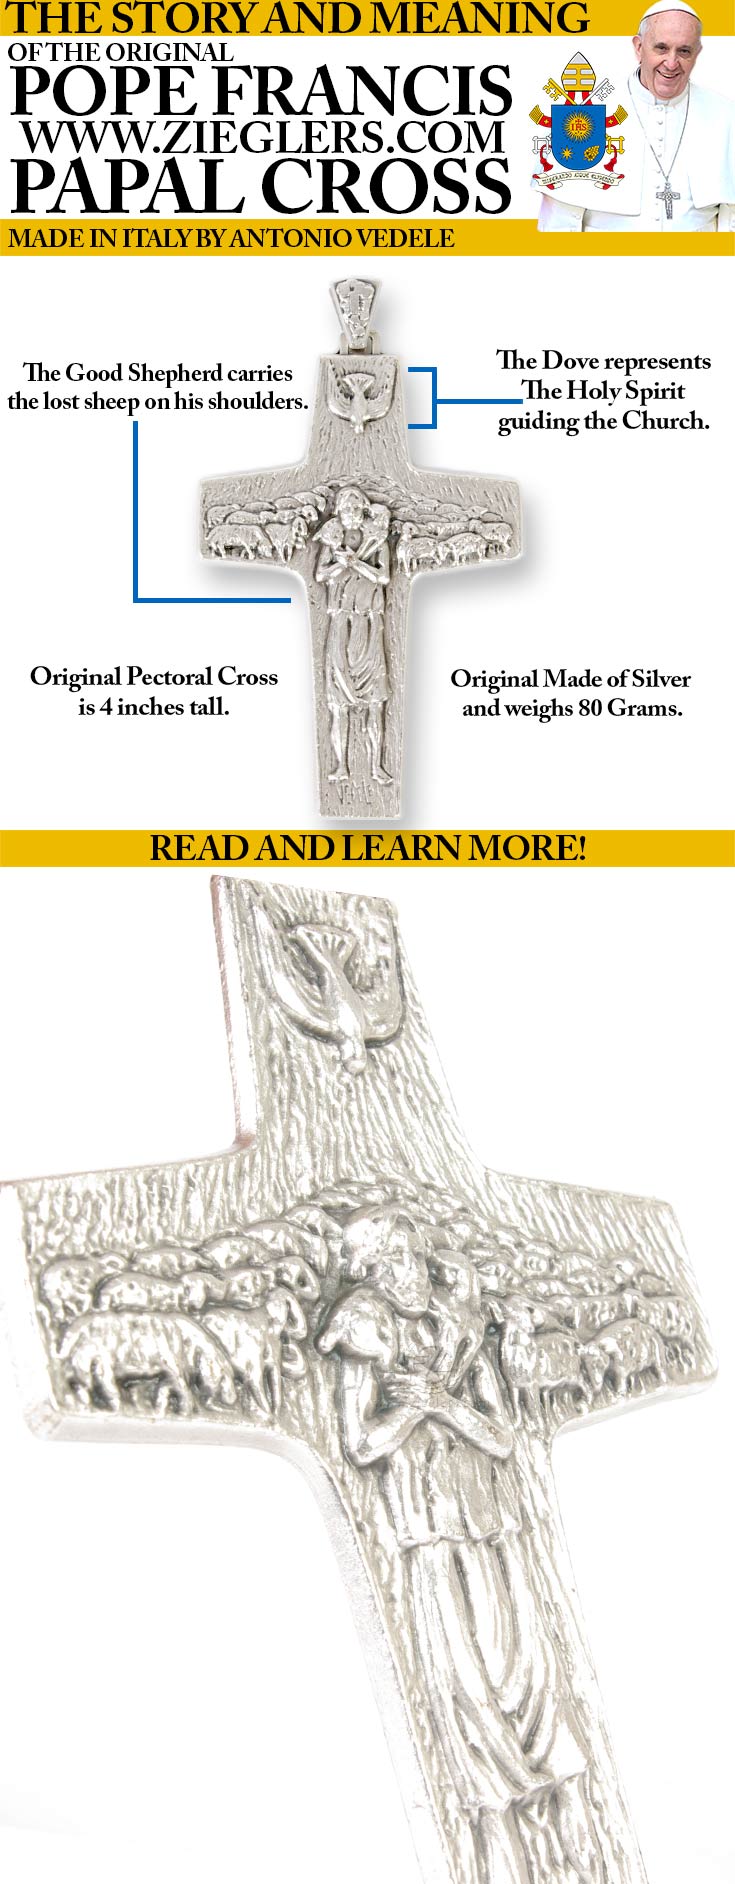 shop Other Pope Francis Gifts and view The original Pope Francis Papal Cross replicas!